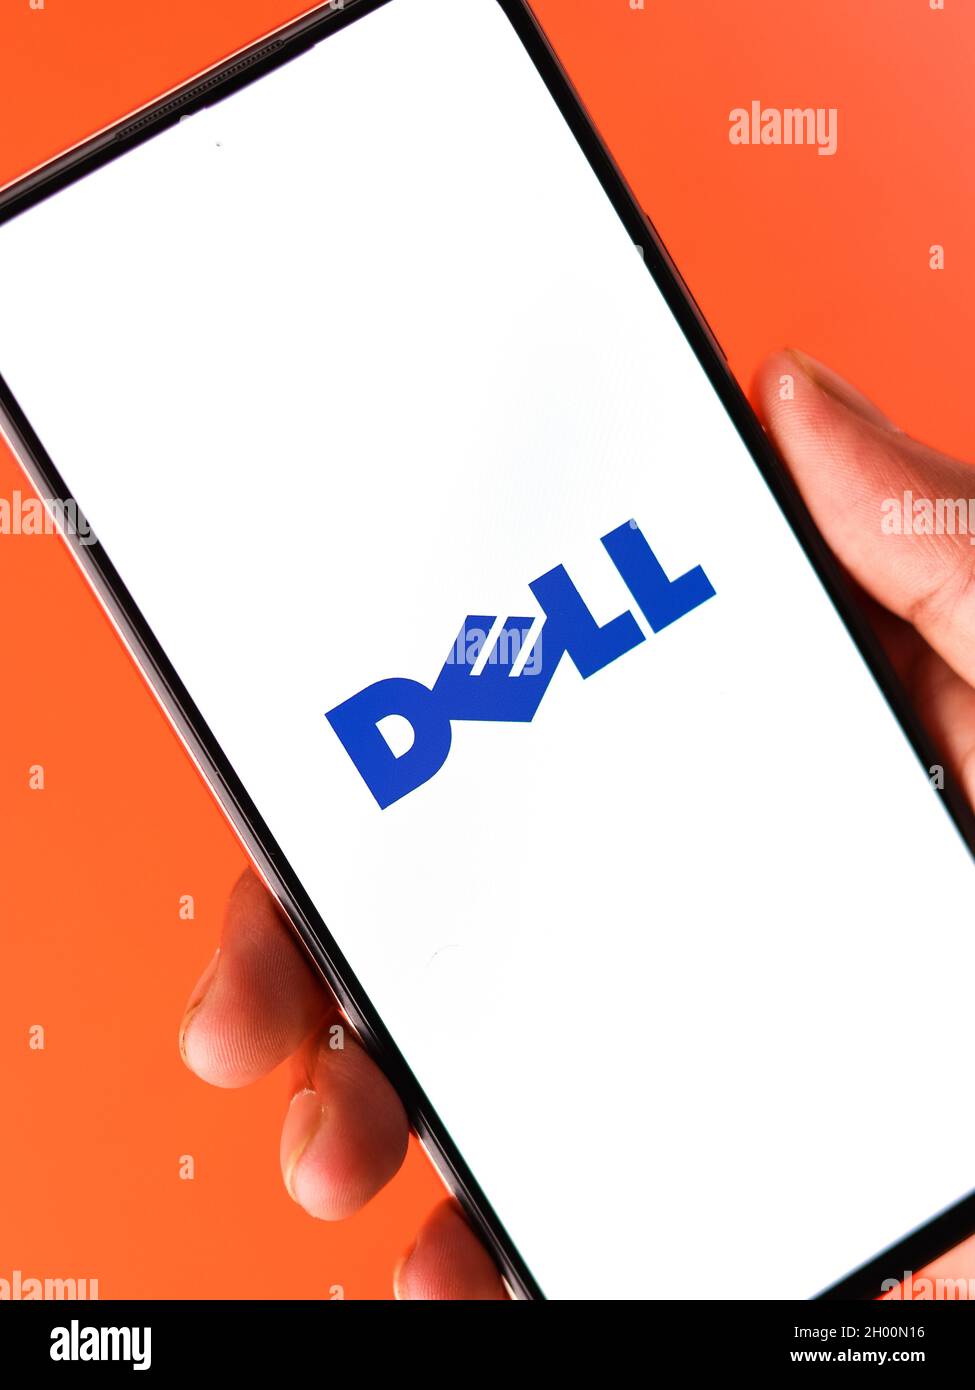 West Bangal, India - October 09, 2021 : Dell logo on phone screen stock image. Stock Photo